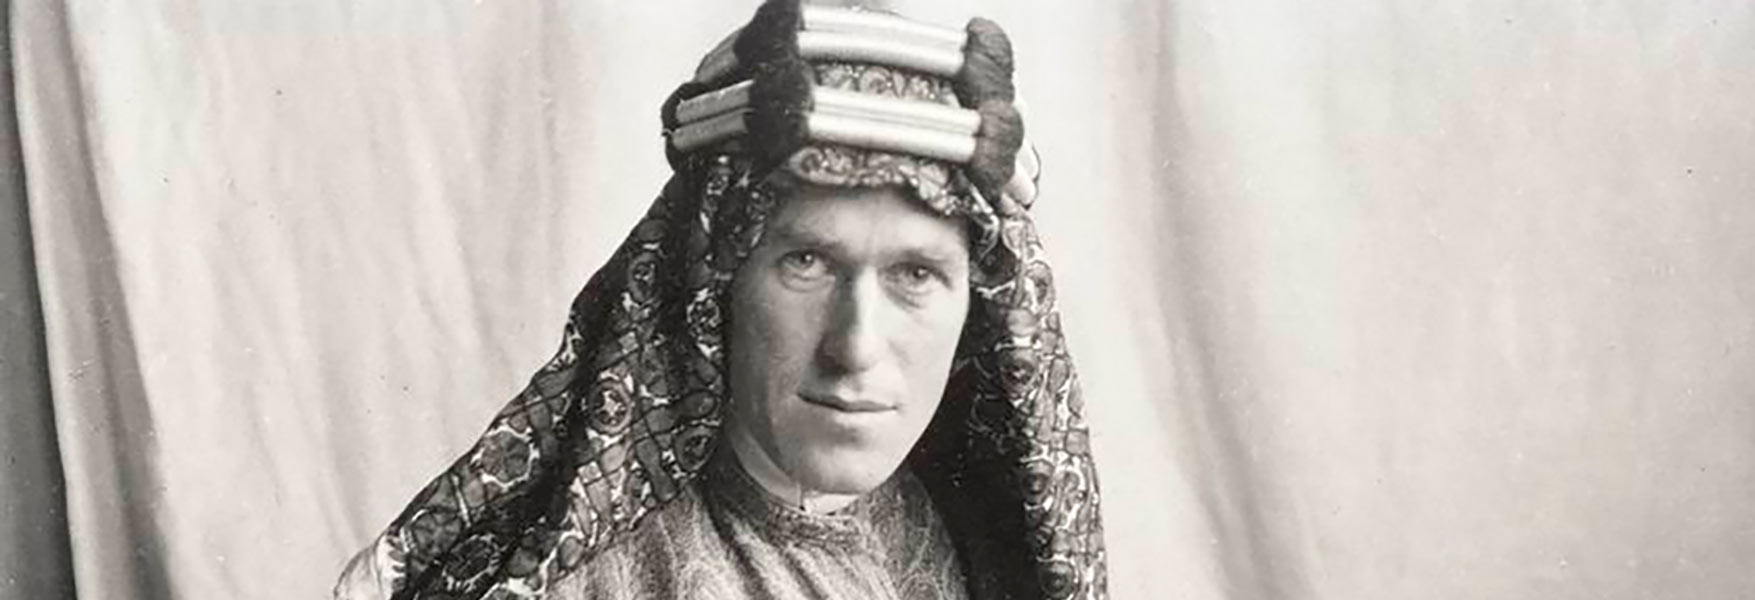 How the death of Lawrence of Arabia led to the use of the motorcycle helmet